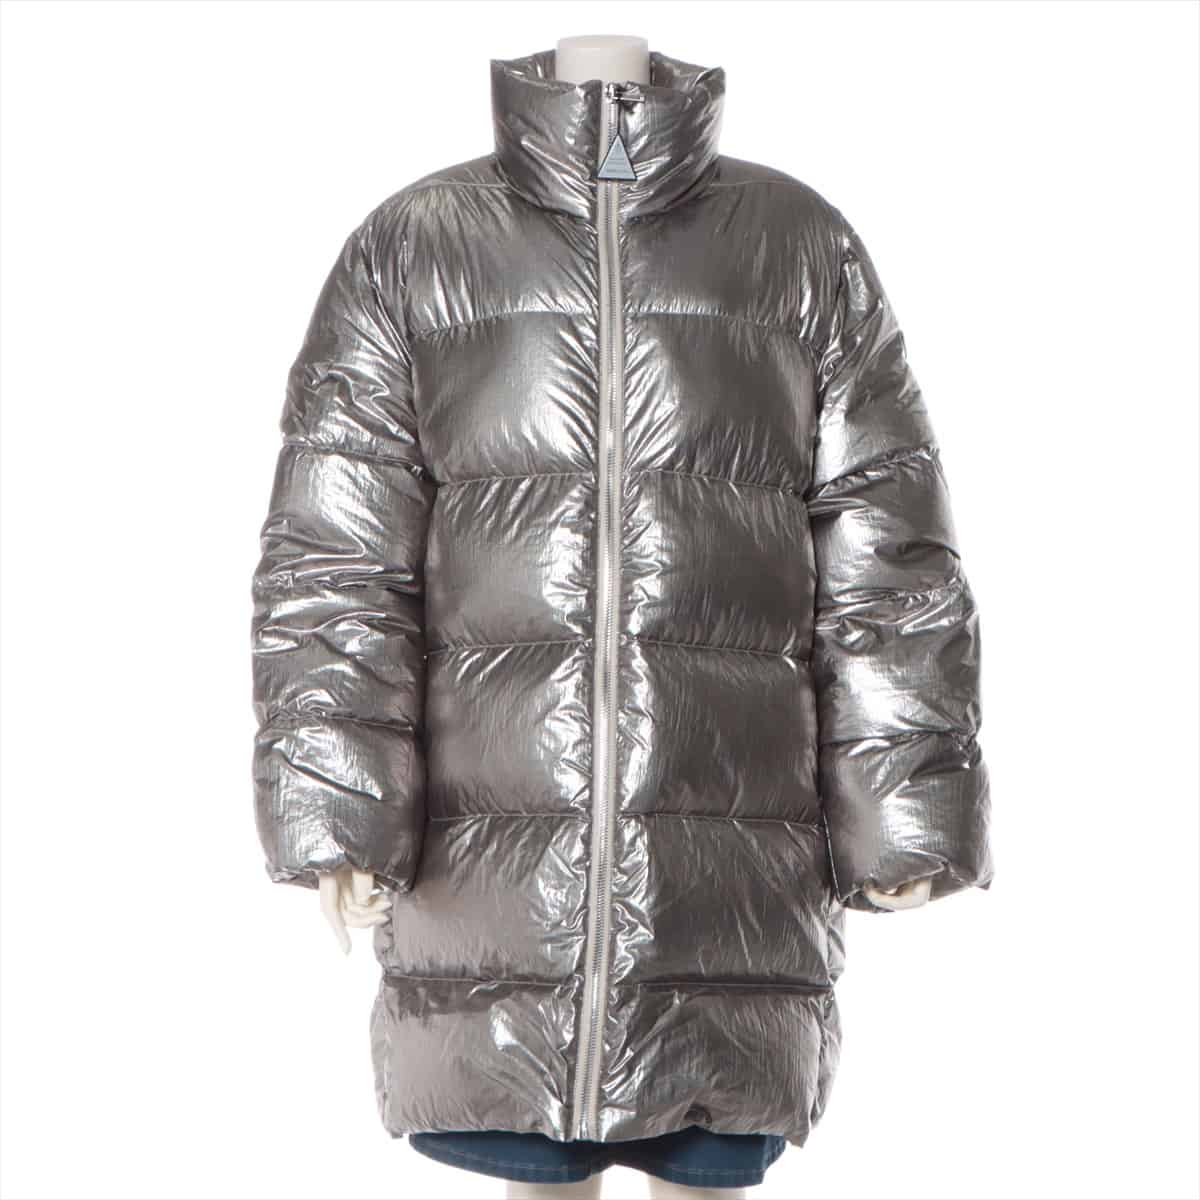 Moncler x Rick Owens 20 years Nylon Down jacket 1 Unisex Silver  CYCLOPIC